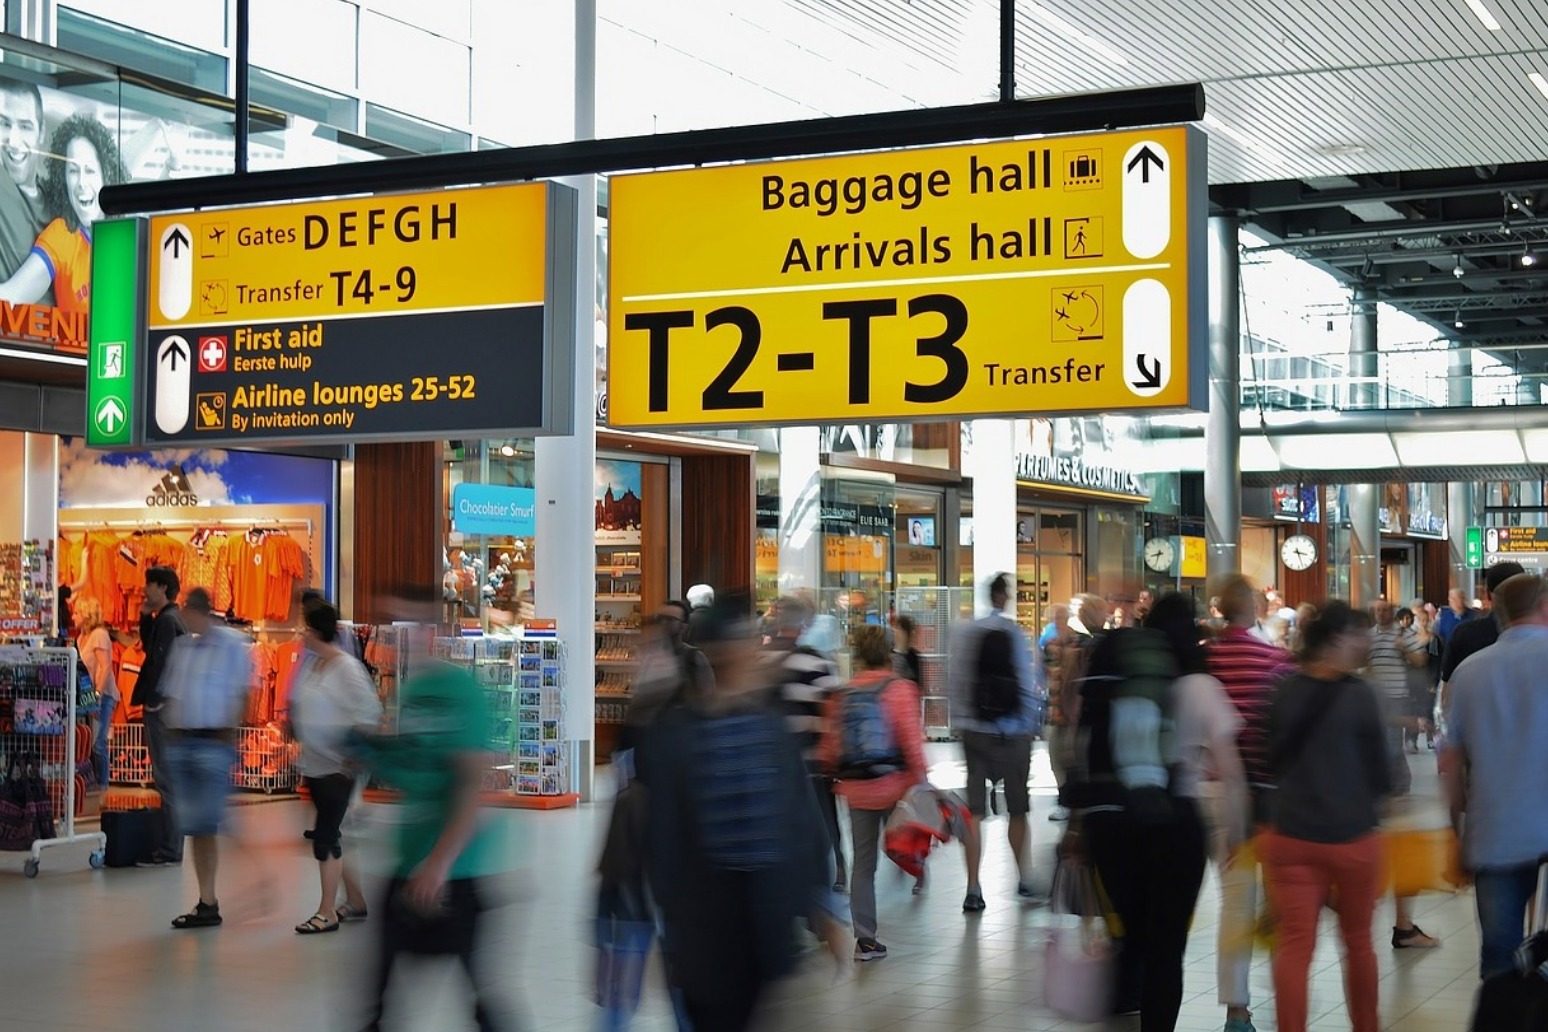 Government consultation into 24 hour airport drinking 